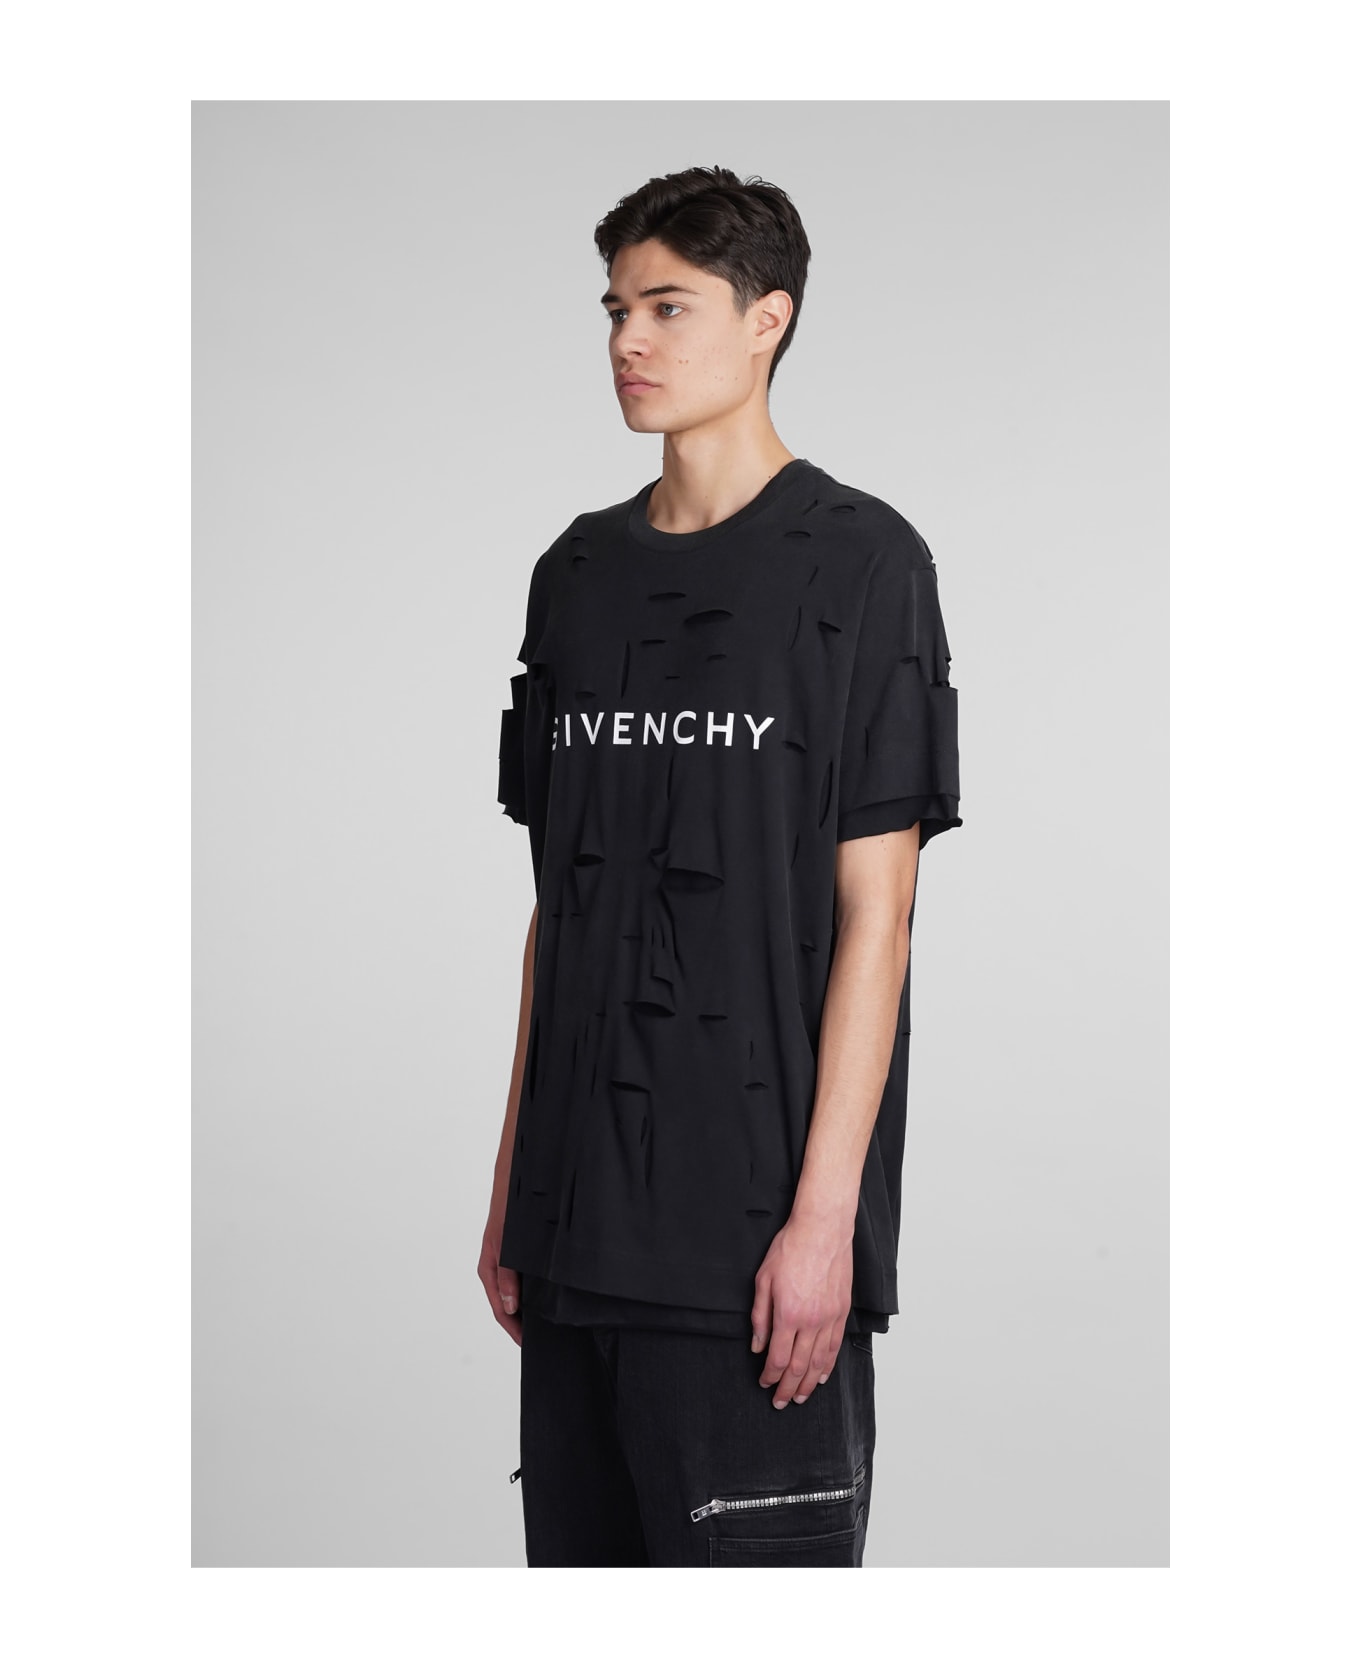 Givenchy Destroyed Effect T-shirt - FADED BLACK シャツ